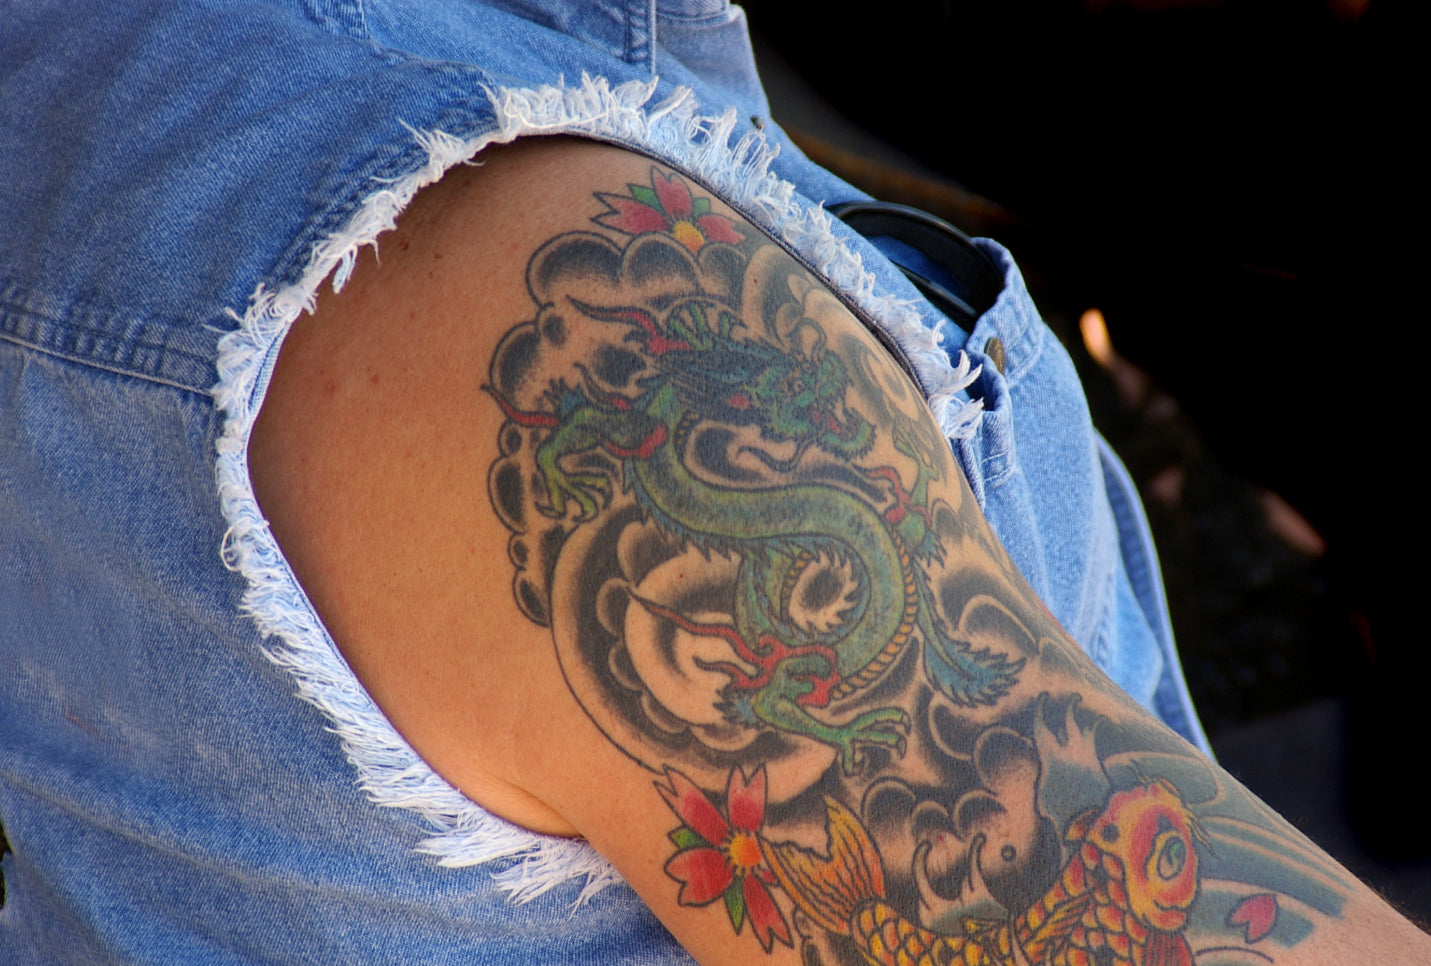 10 Fishing Tattoos That Actually Look Good - Wide Open Spaces